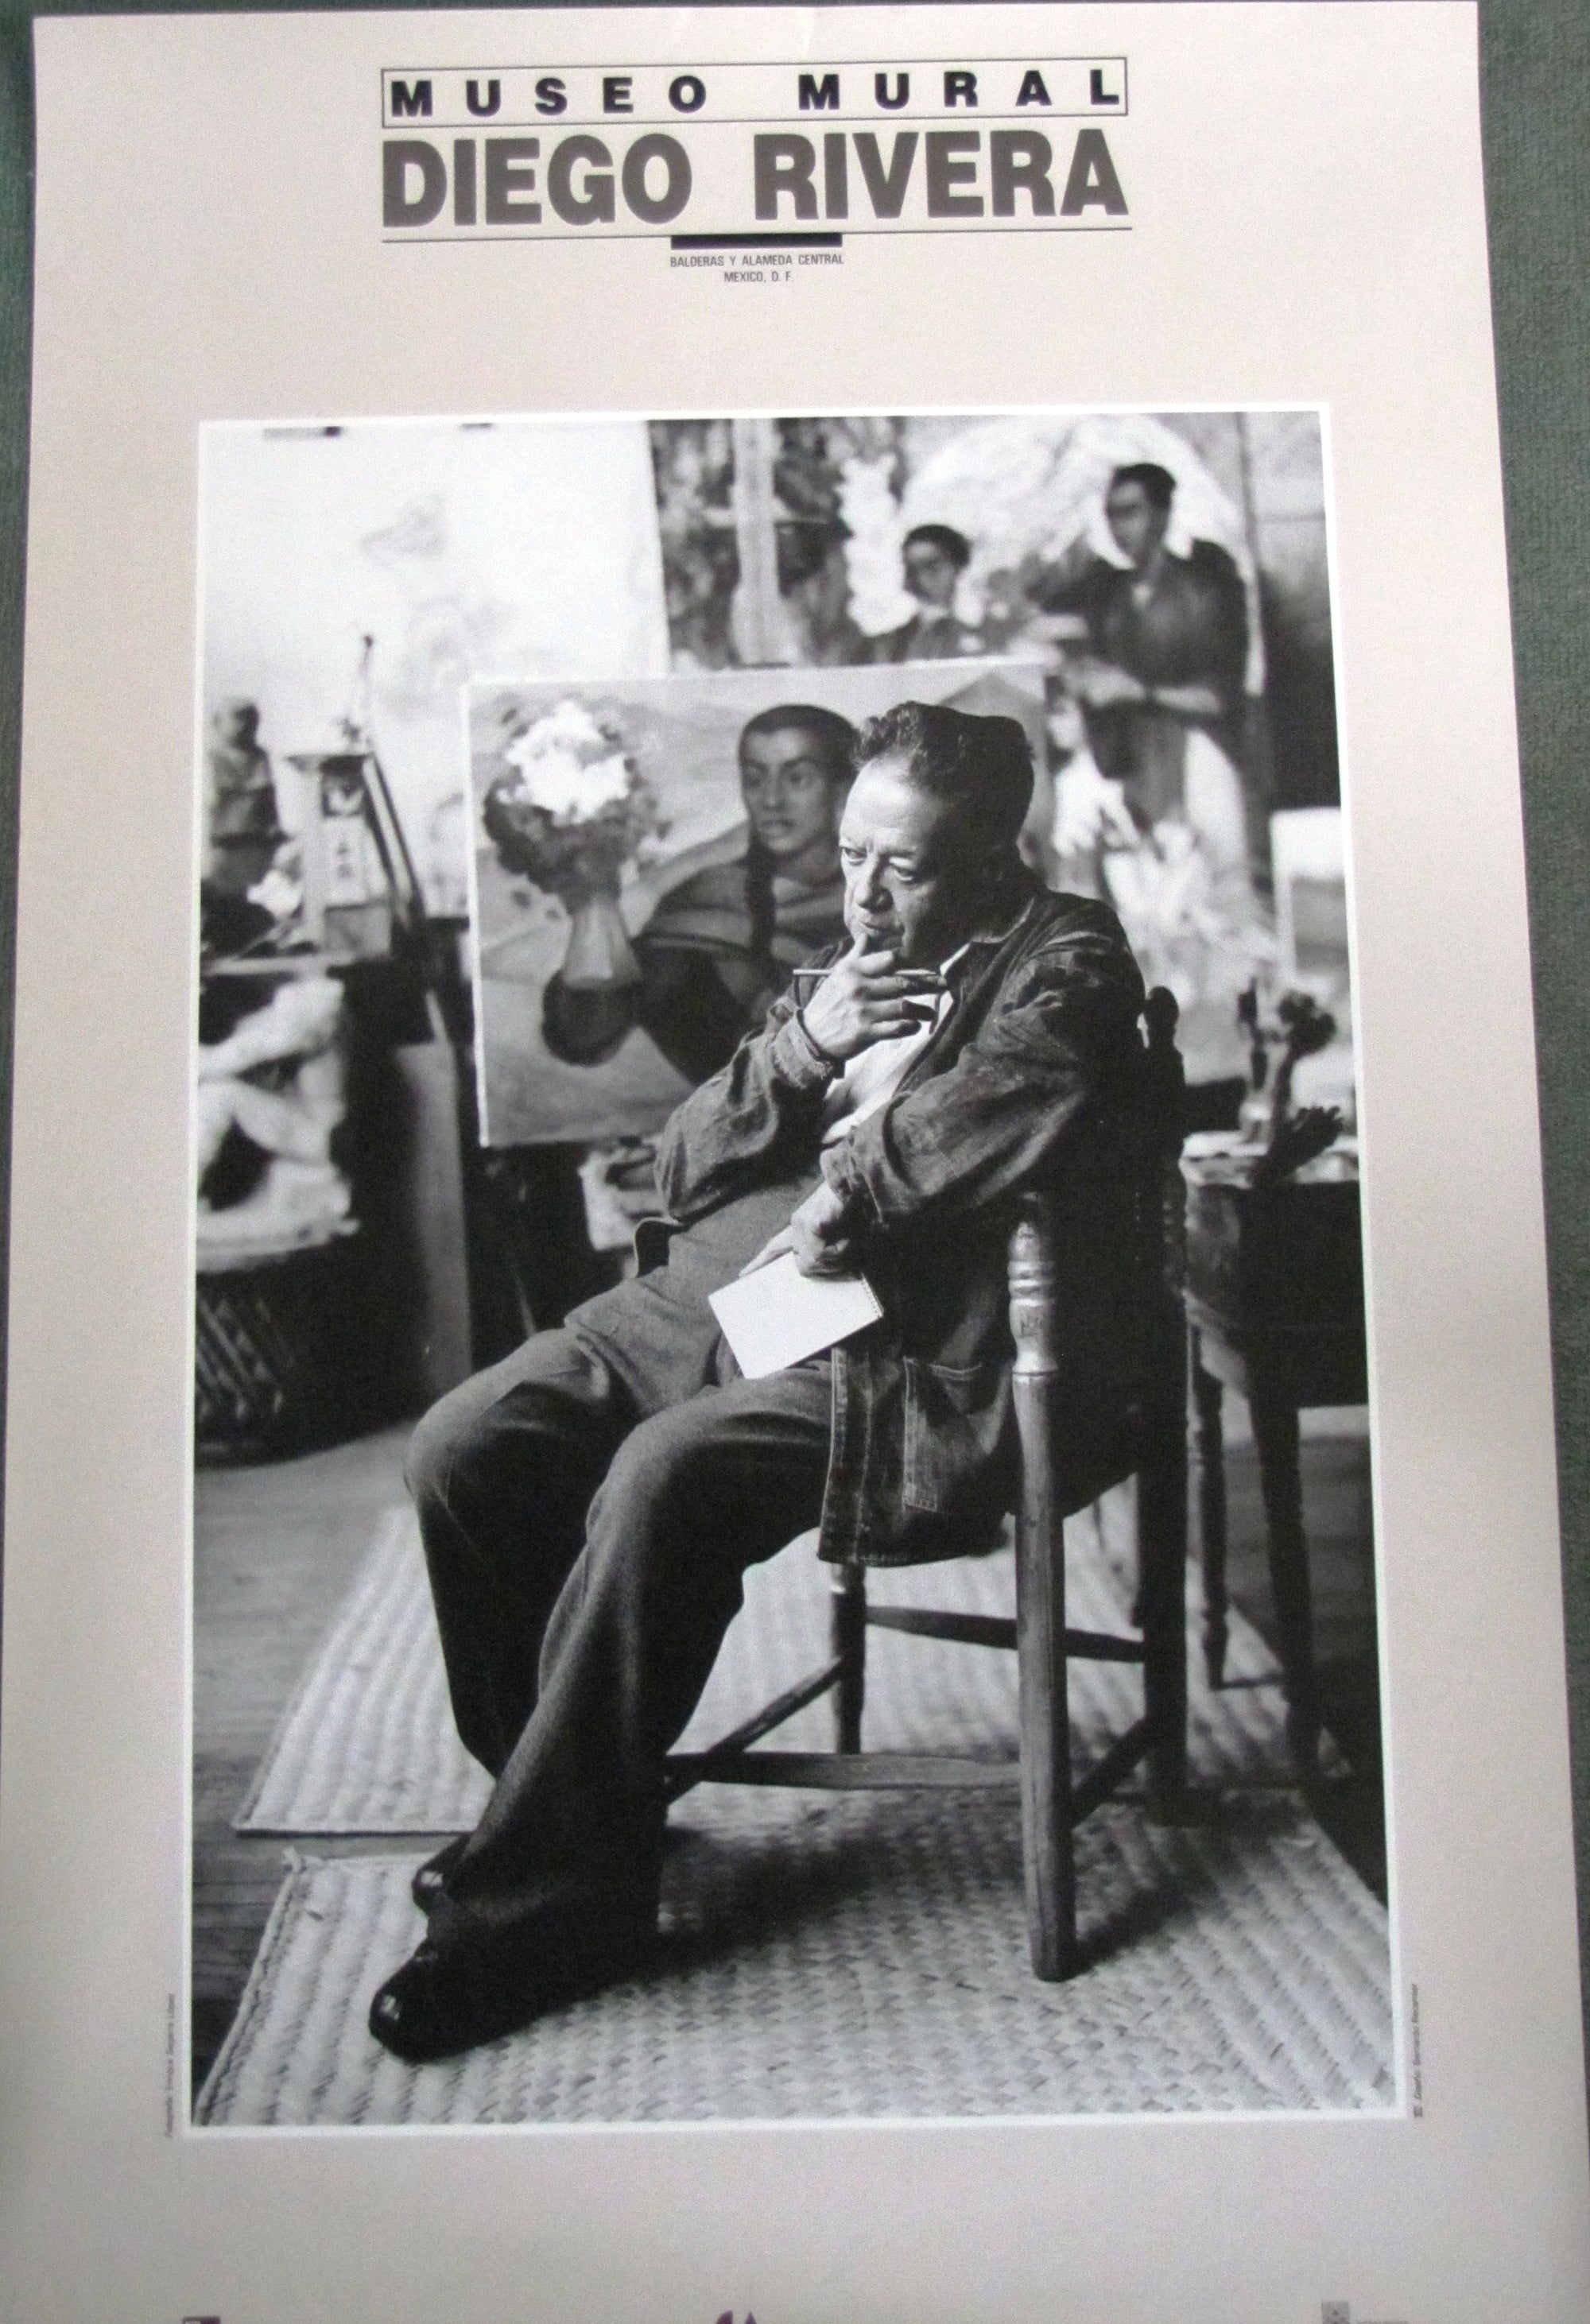 DIEGO RIVERA - photo poster of him thinking from an exhibit at the Museo Mural